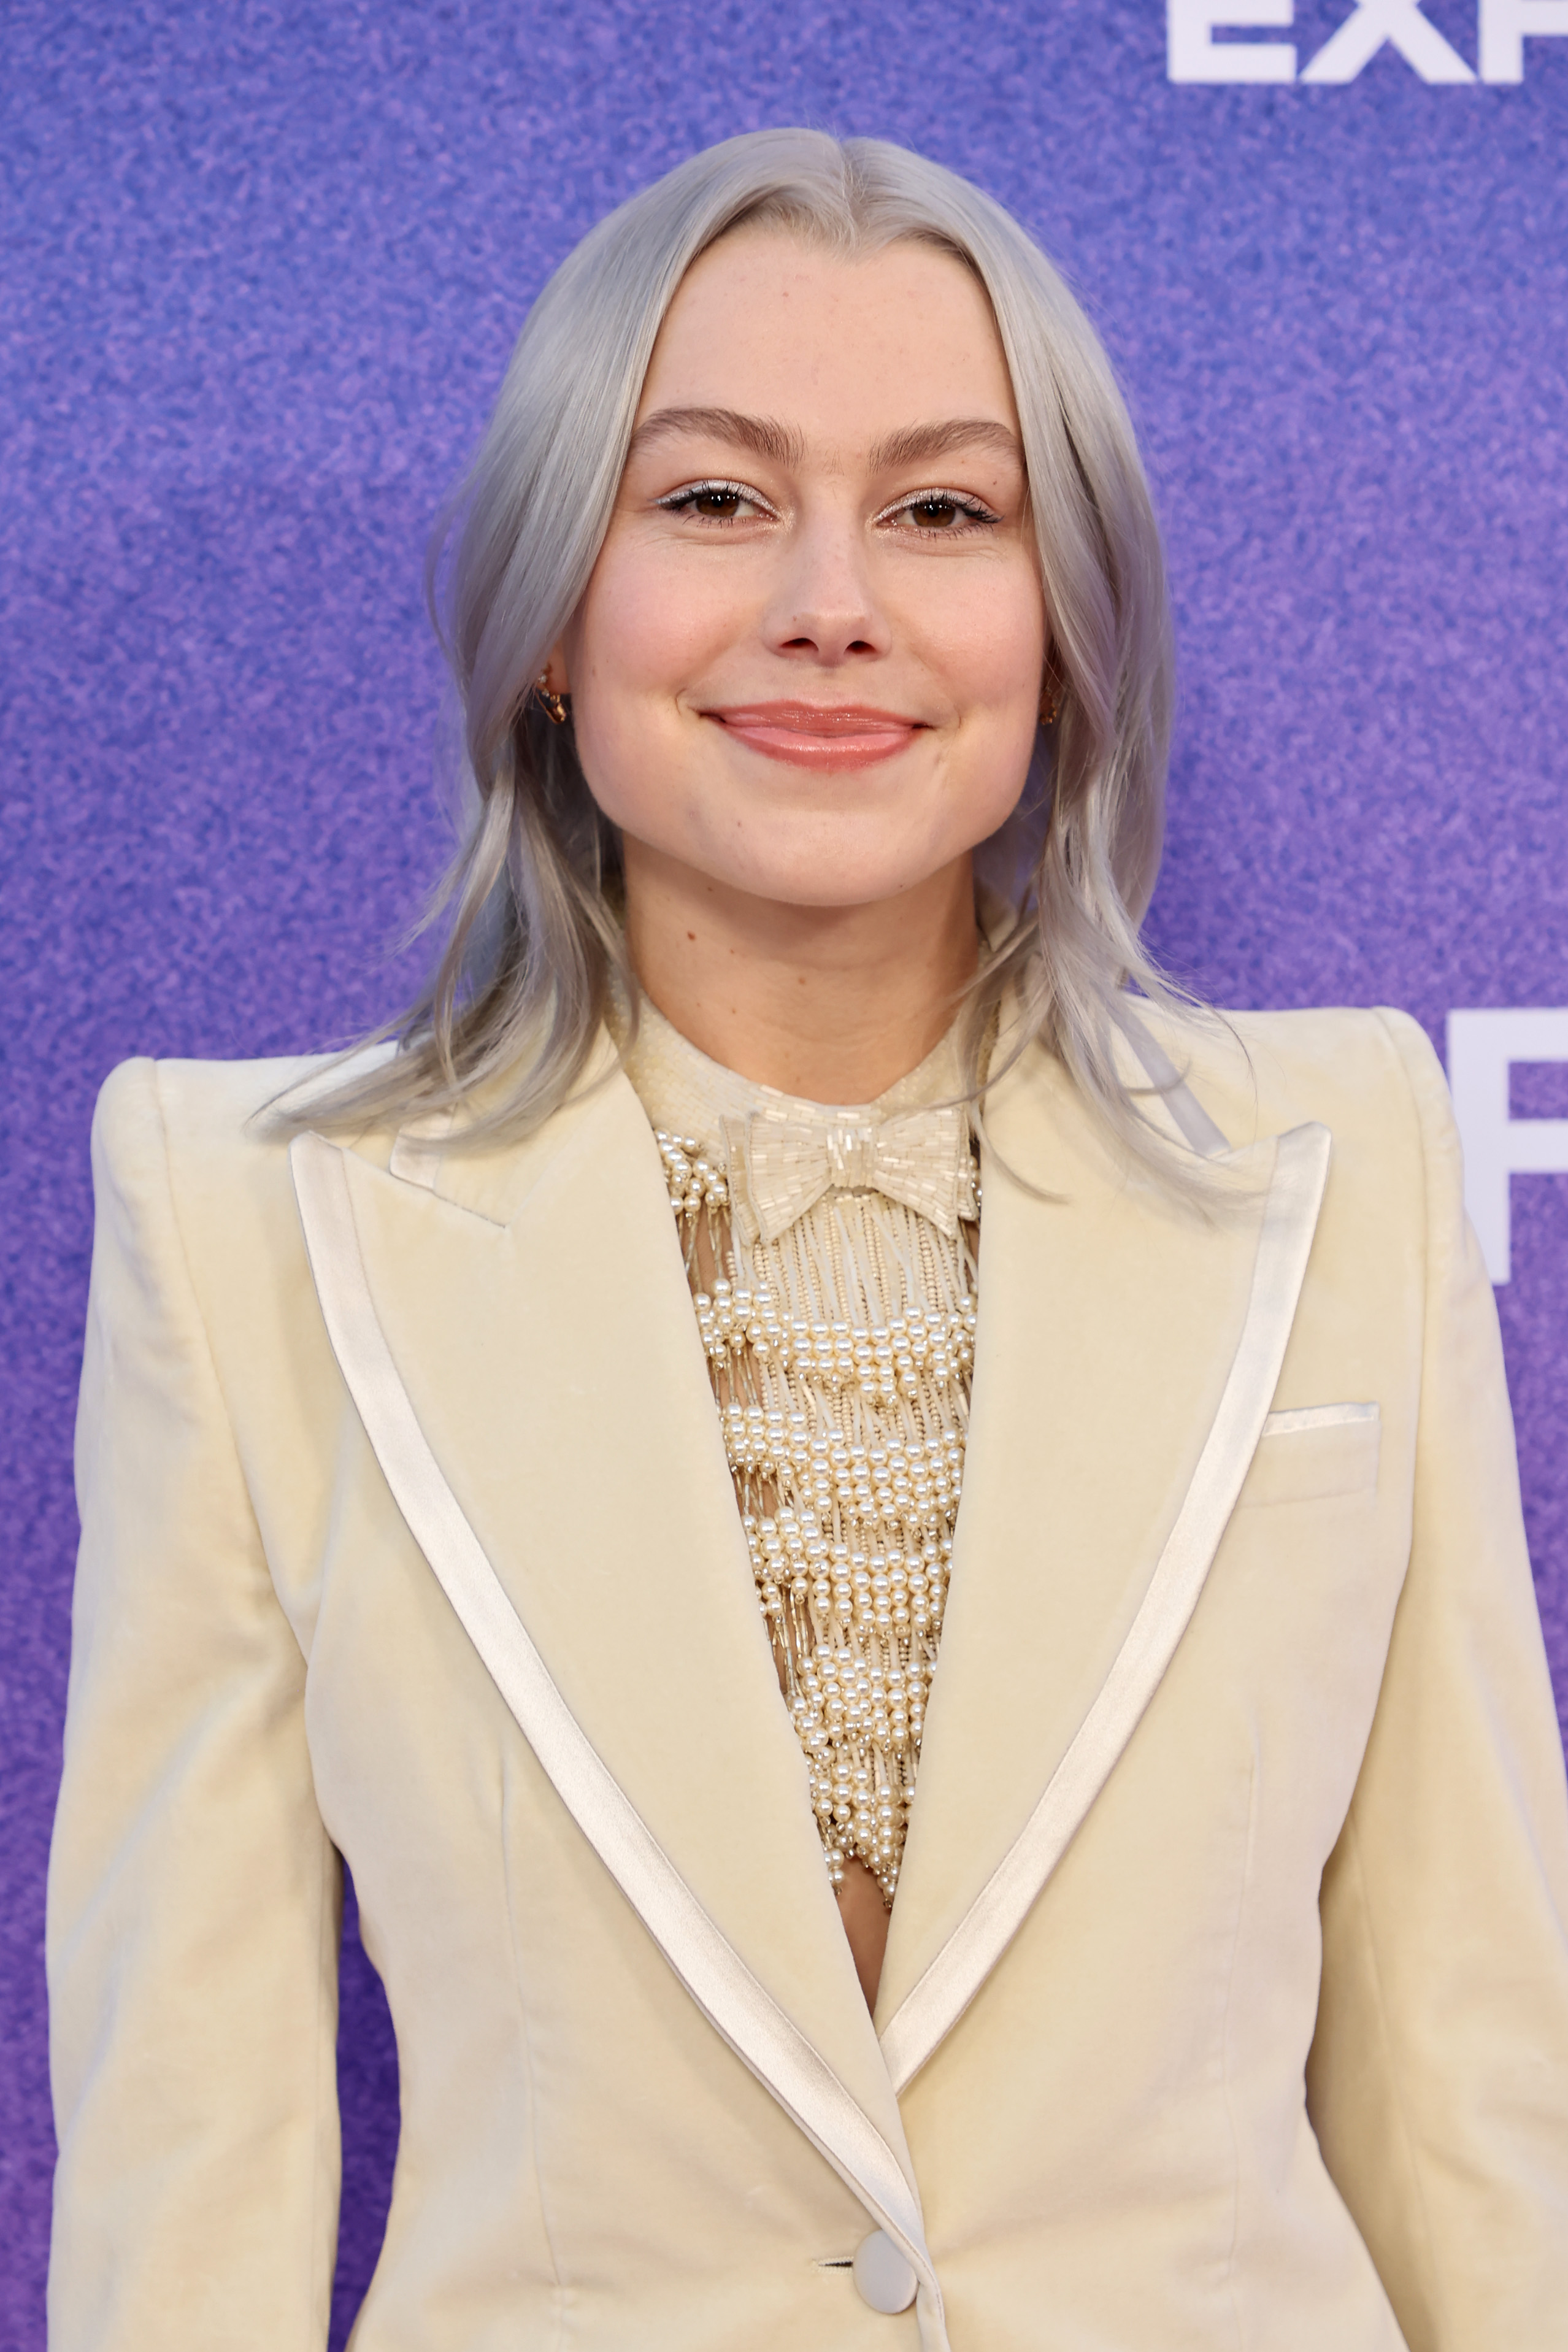 Phoebe Bridgers attends Billboard Women in Music at YouTube Theater on March 02, 2022 in Inglewood, California.,